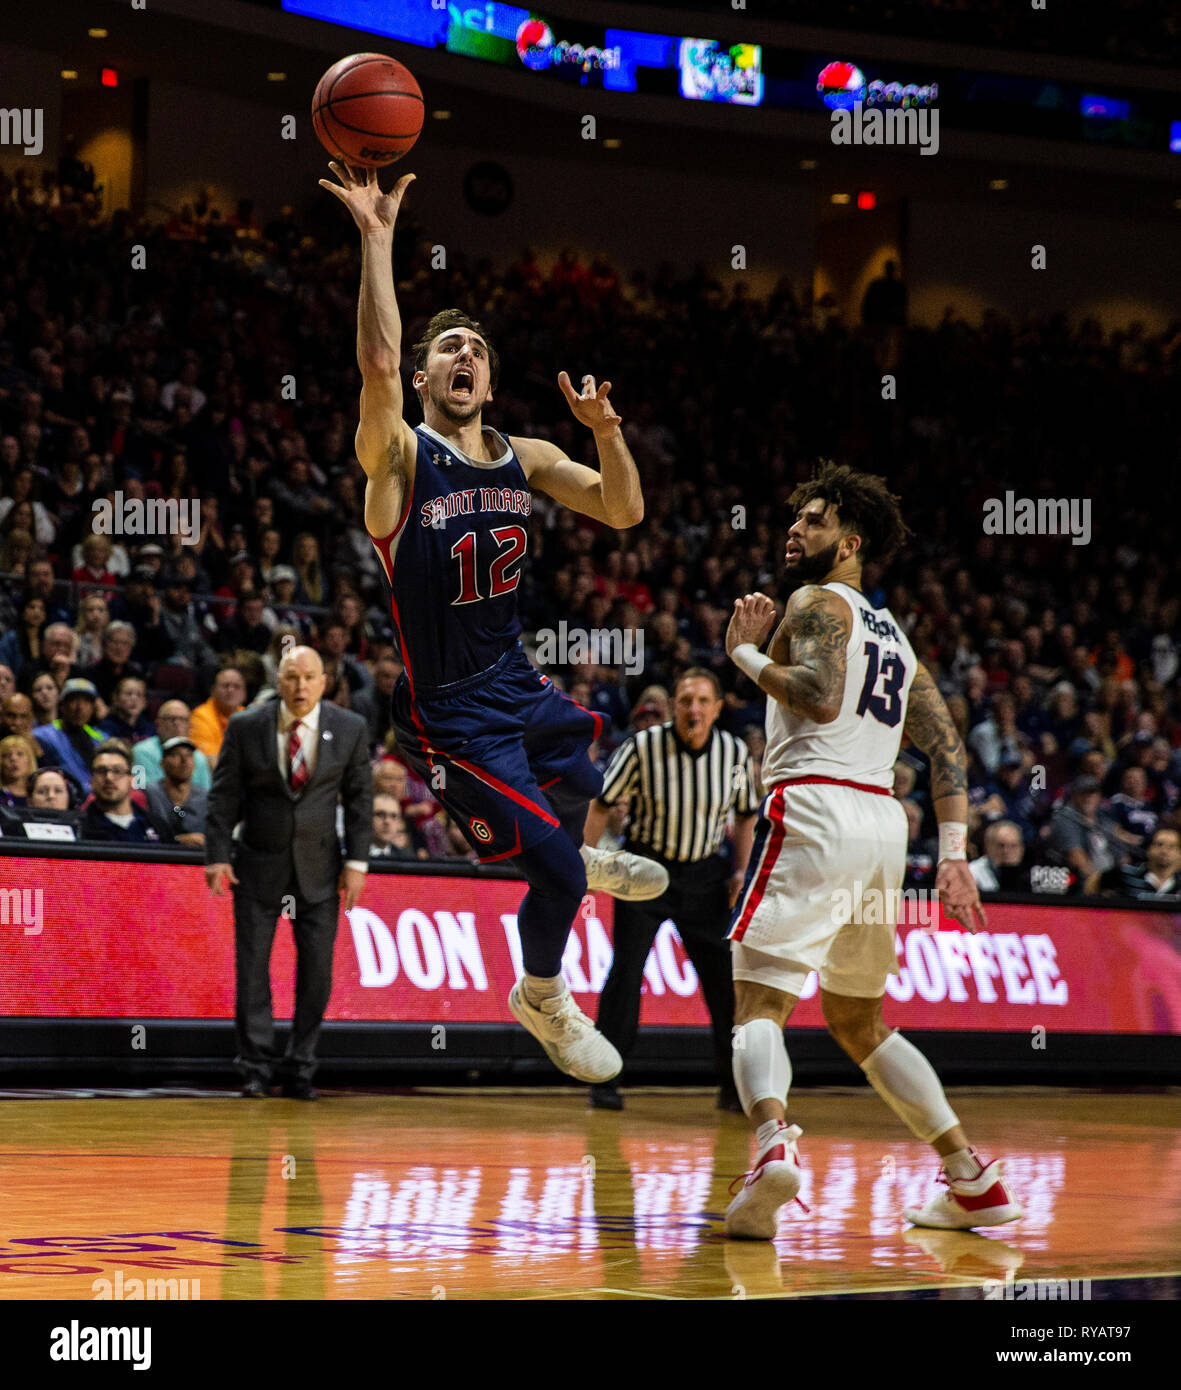 Mar 12 2019 Las Vegas, NV, U.S.A. St. Mary's guard Tommy Kuhse (12) drives to the basket during the NCAA West Coast Conference Men's Basketball Tournament championship between the Gonzaga Bulldogs and the Saint Mary's Gaels 60-47 win at Orleans Arena Las Vegas, NV. Thurman James/CSM Stock Photo